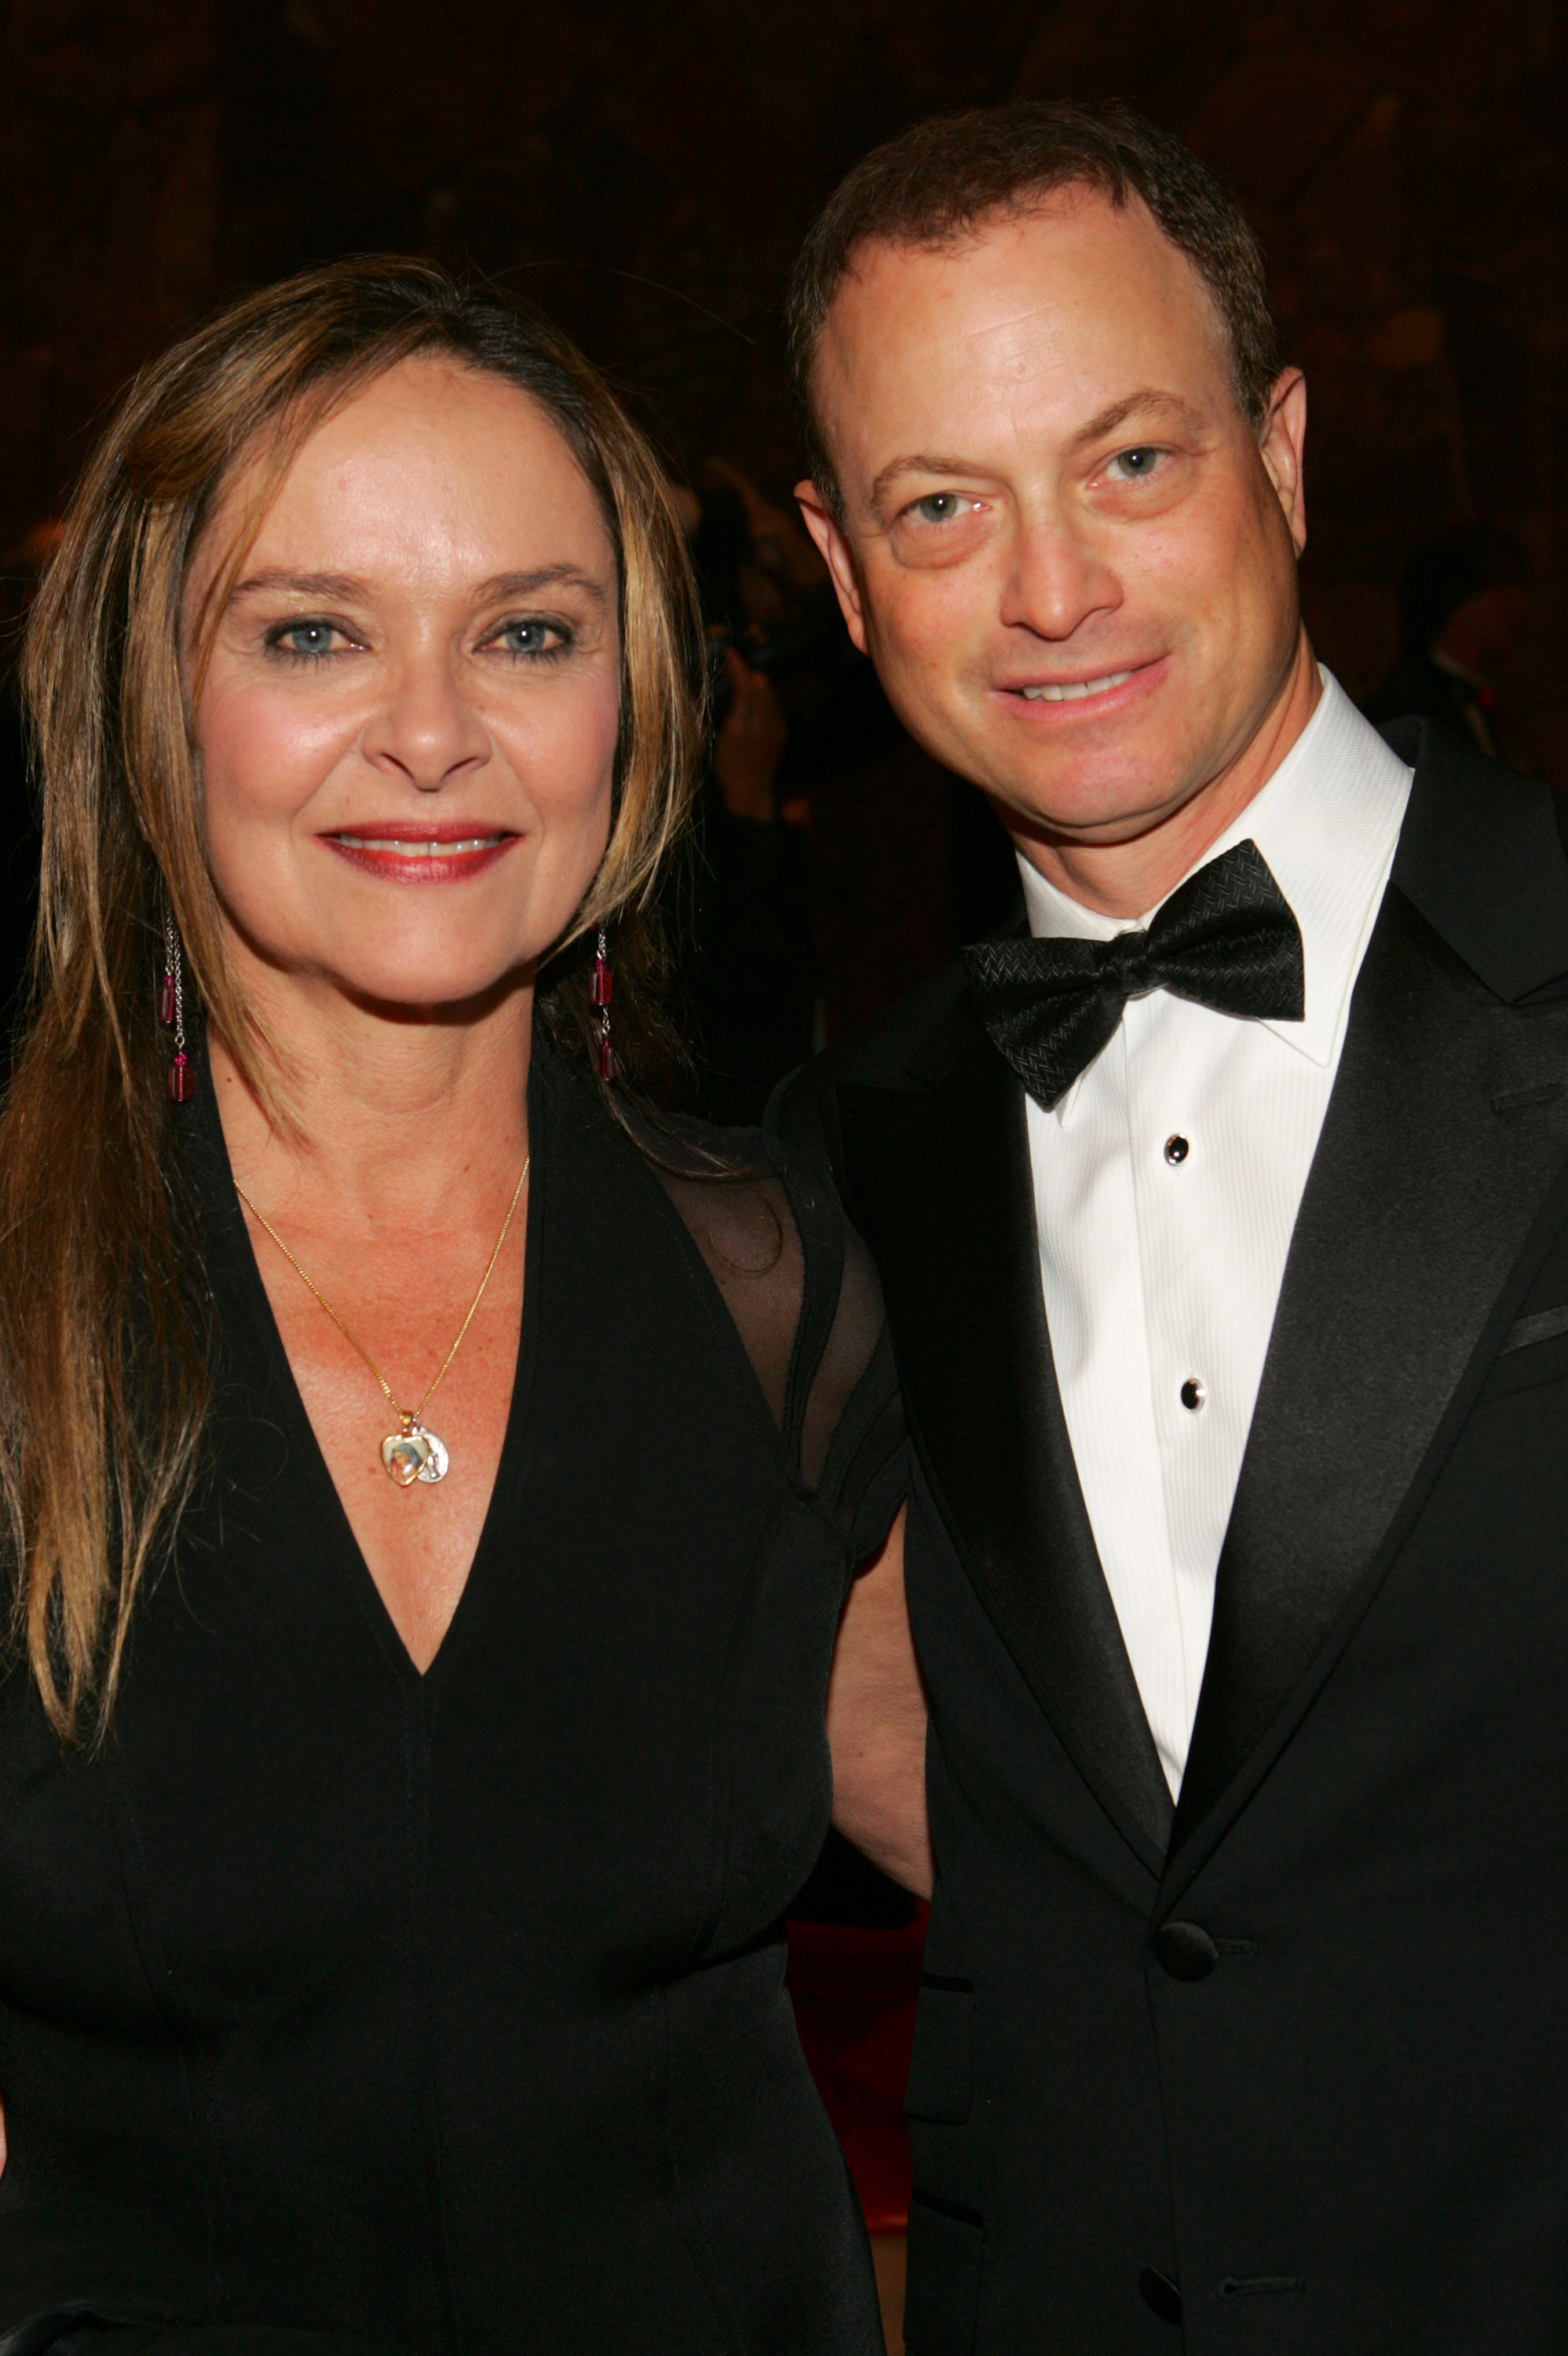 Moira Harris and Gary Sinise during the 17th Annual Palm Springs International Film Festival Awards Gala Presentation - Red Carpet at the Palm Springs Convention Center in Palm Springs, California, on January 7, 2006. | Source: Getty Images